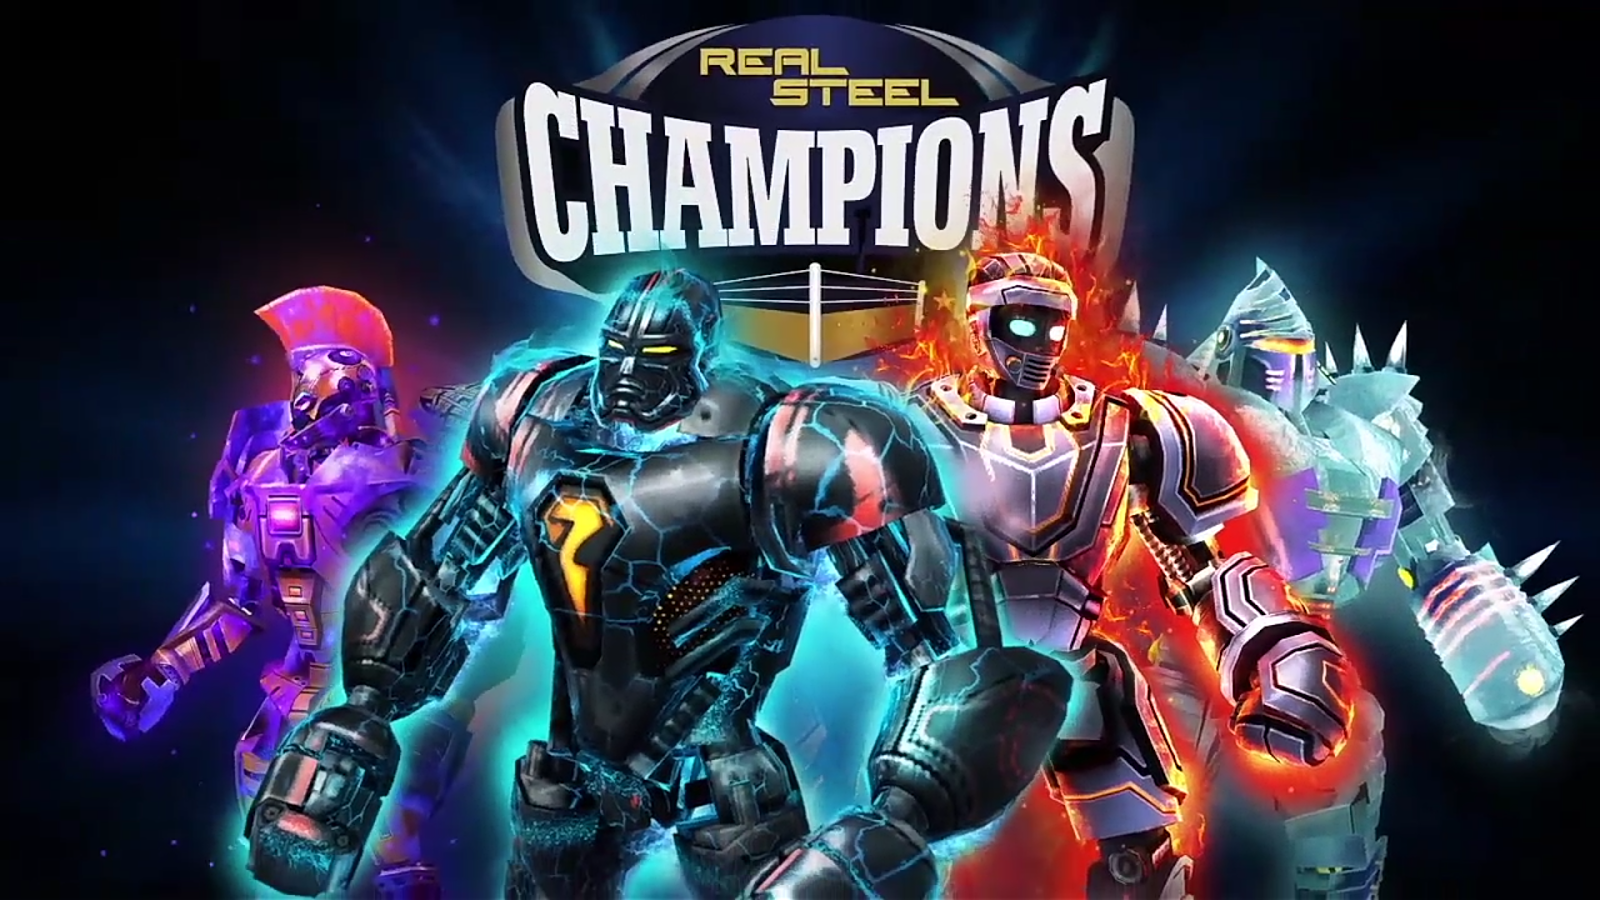 Real Steel Champions hack